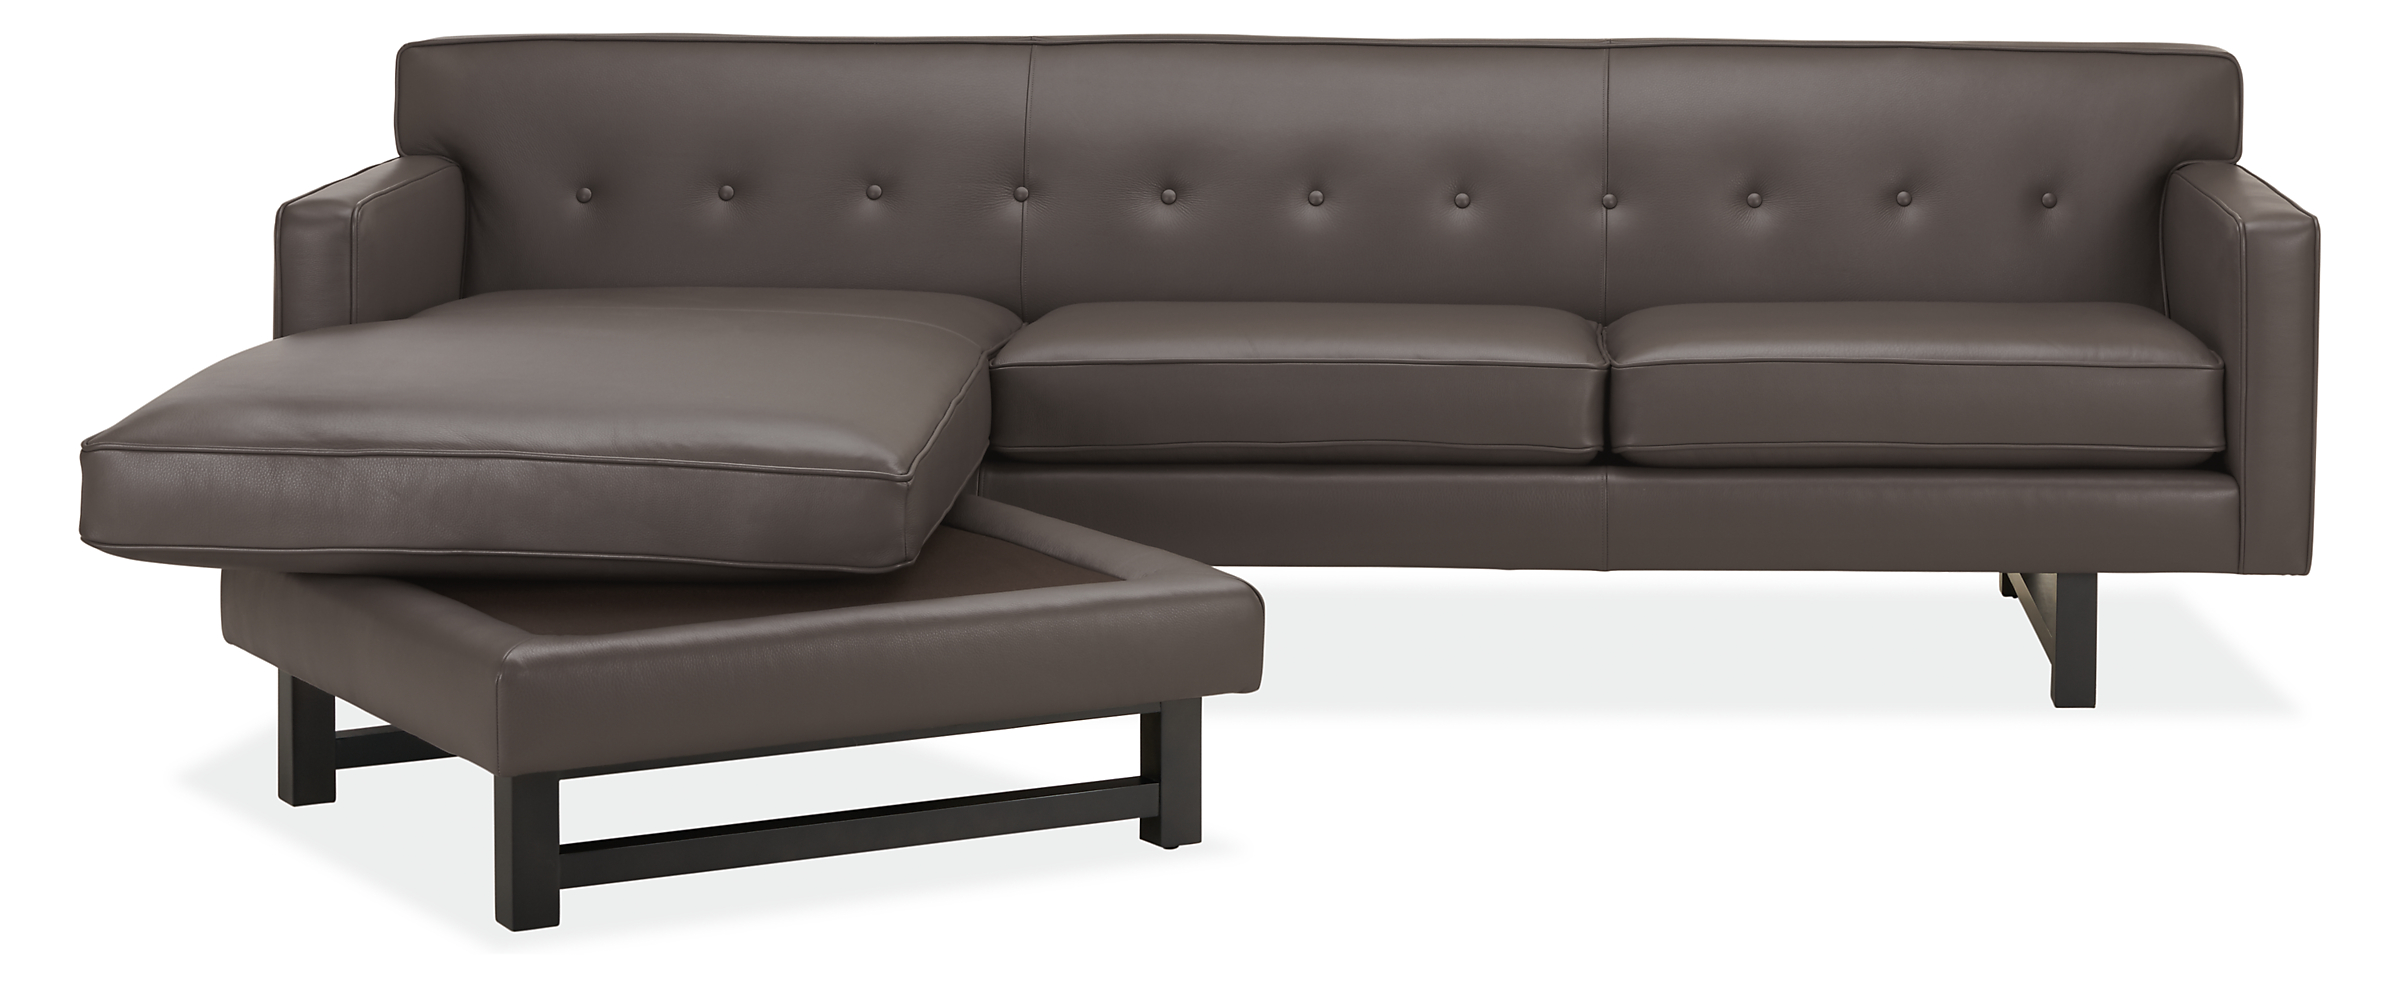 Detail  View  of Andre 101-wide Sofa with Left-Arm Chaise in Urbino Smoke.